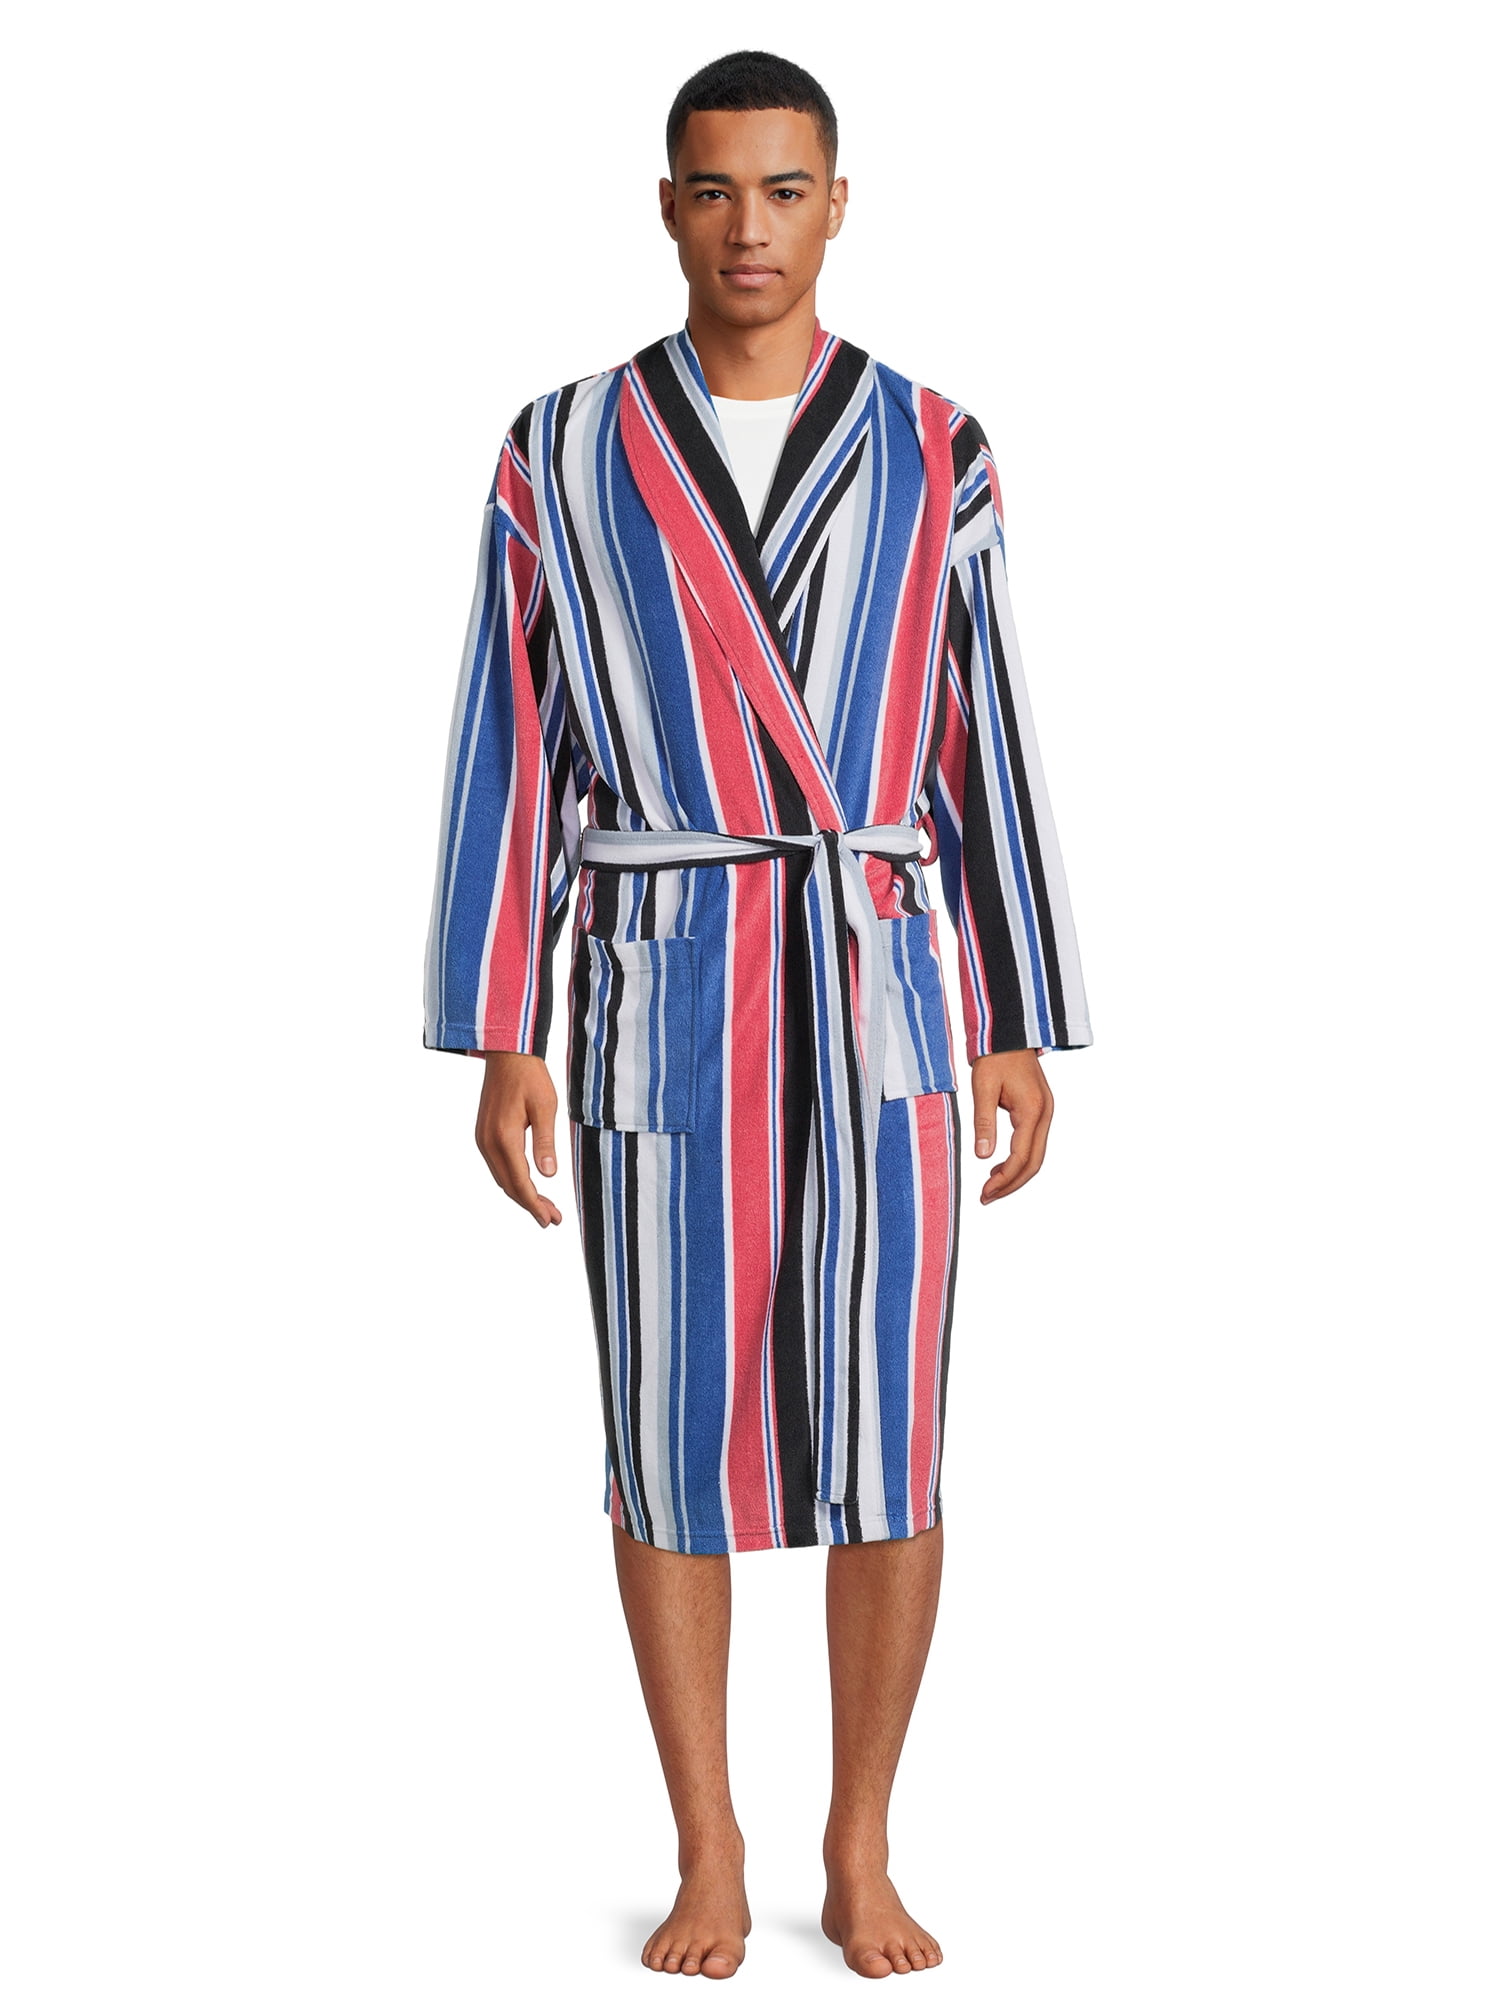 Ande Men's Belted Terry Robe with Pockets - Walmart.com